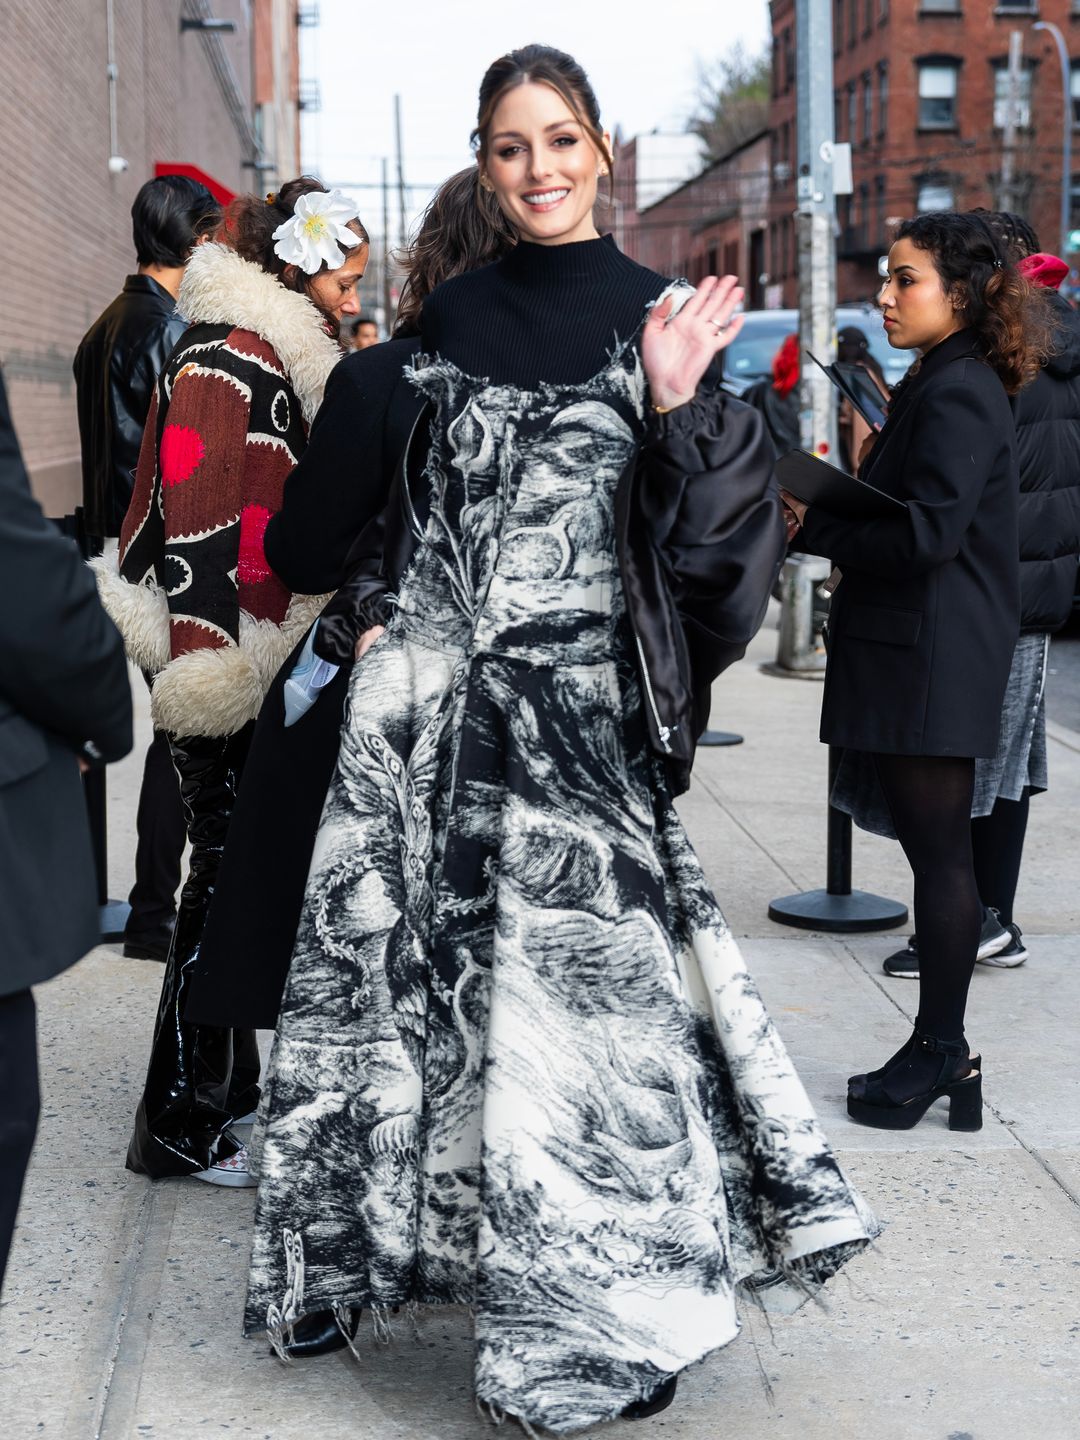 Olivia Palermo attends the Jason Wu show in a striking black and white printed gown styled over a knitted turtleneck.